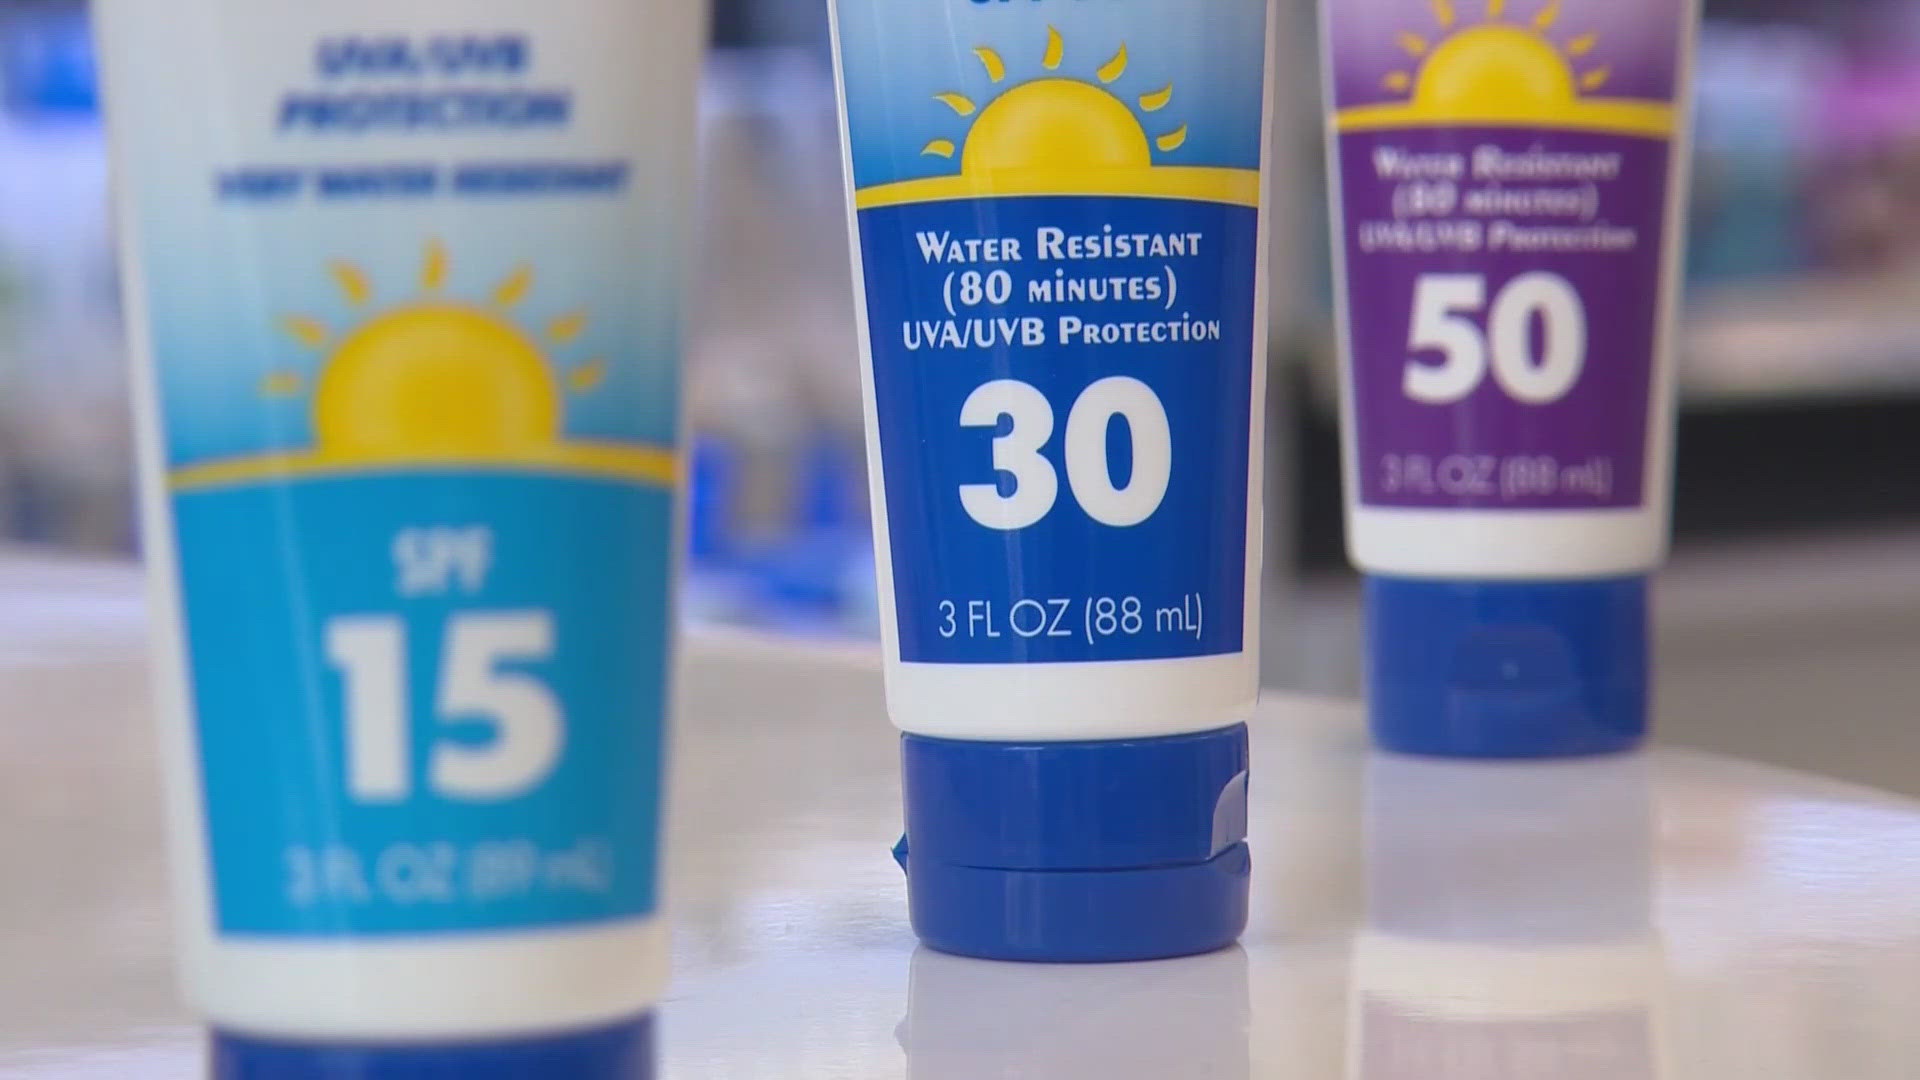 With skin cancer on the rise, WWL Louisiana's Meg Farris with a few tips on sun safety best practices.